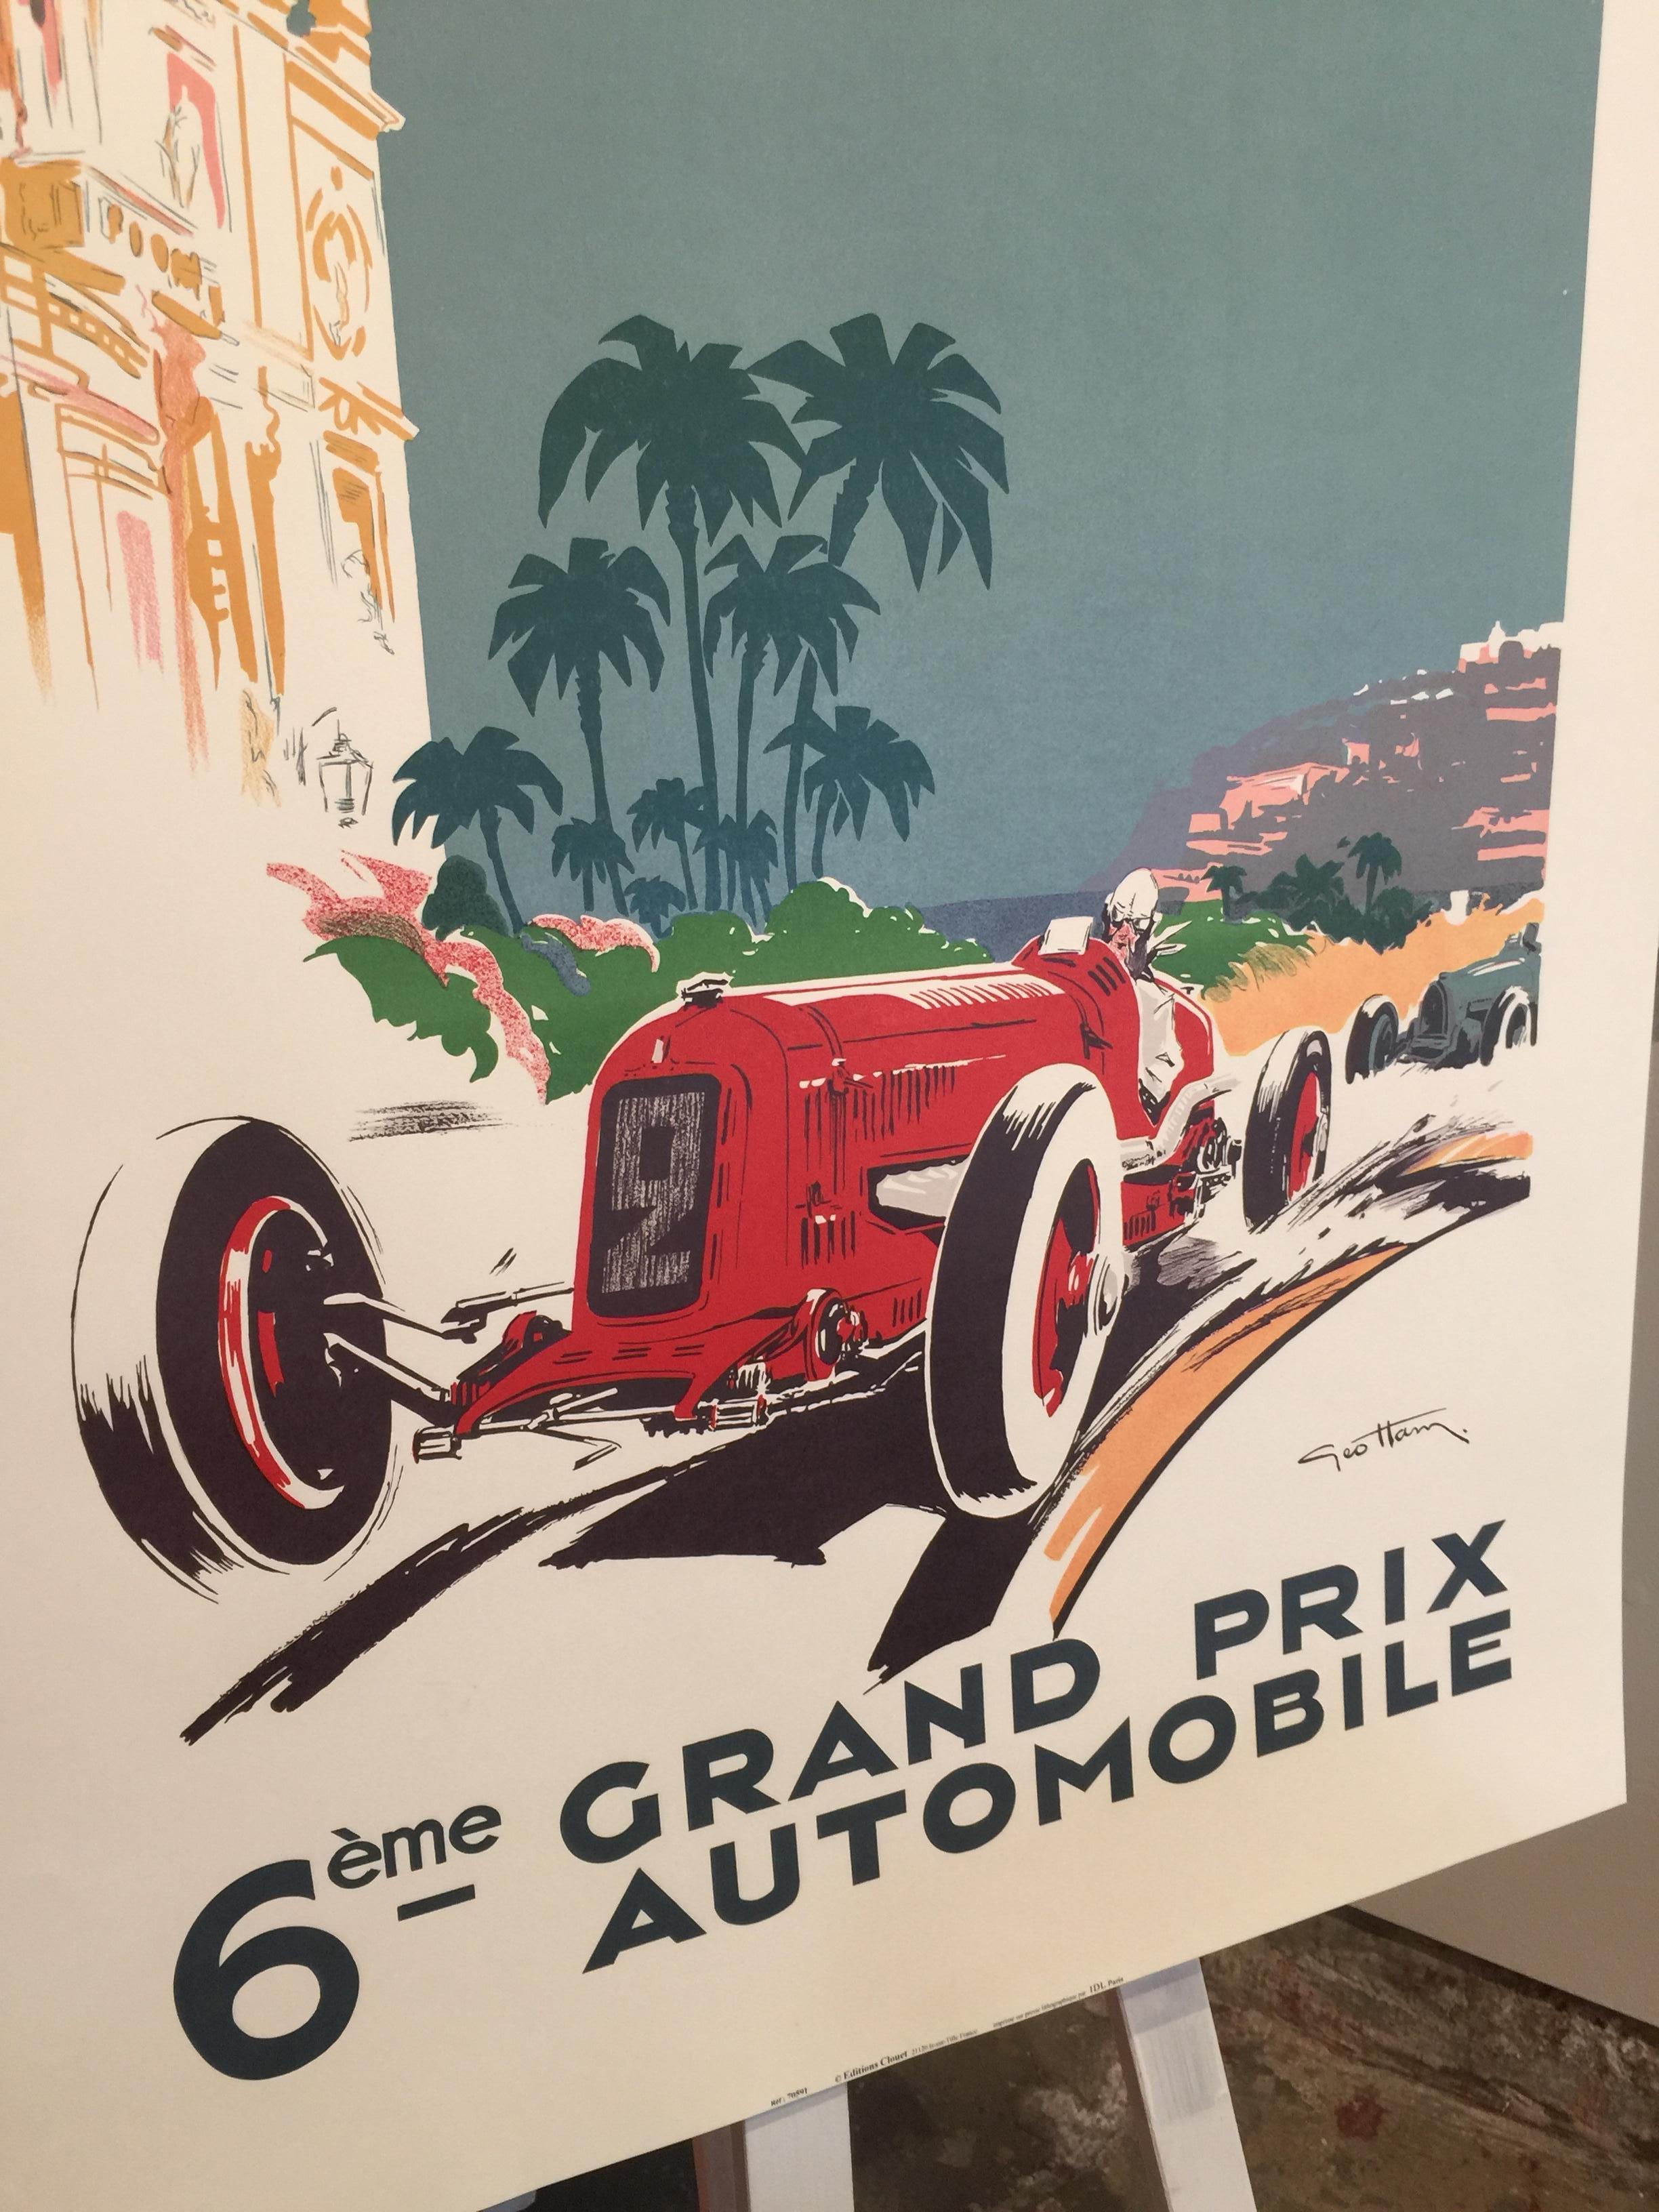 Authorised Edition vintage Monaco Grand Prix car poster by Geo Ham 1934

This poster is advertising the Grand Prix

Printed by IDL Paris, circa 1980
Size: 27 x 39 inch.

 